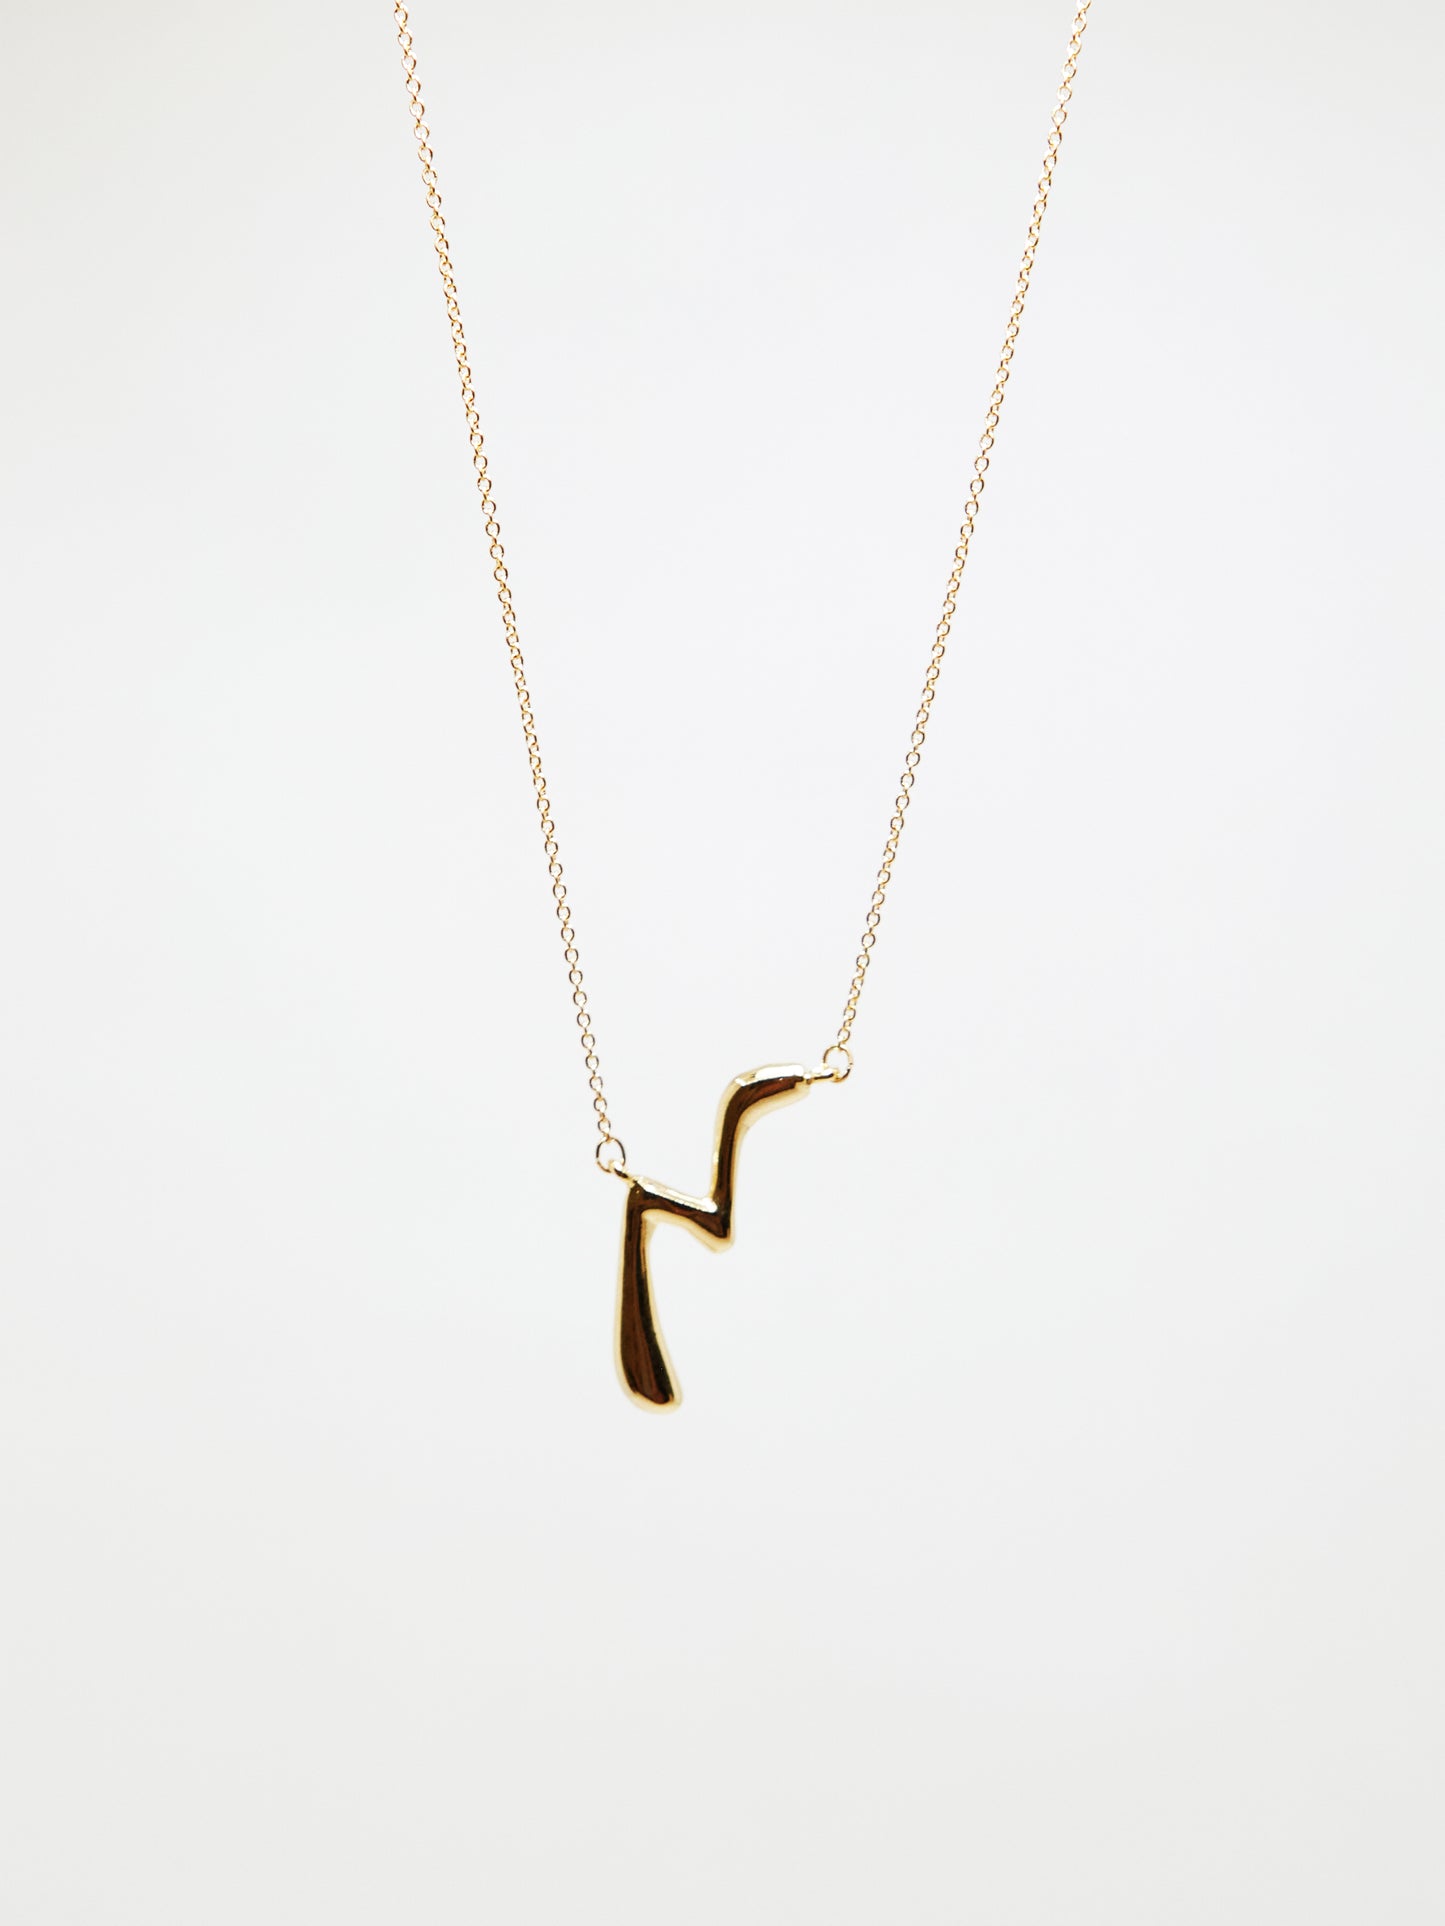 Truth necklace